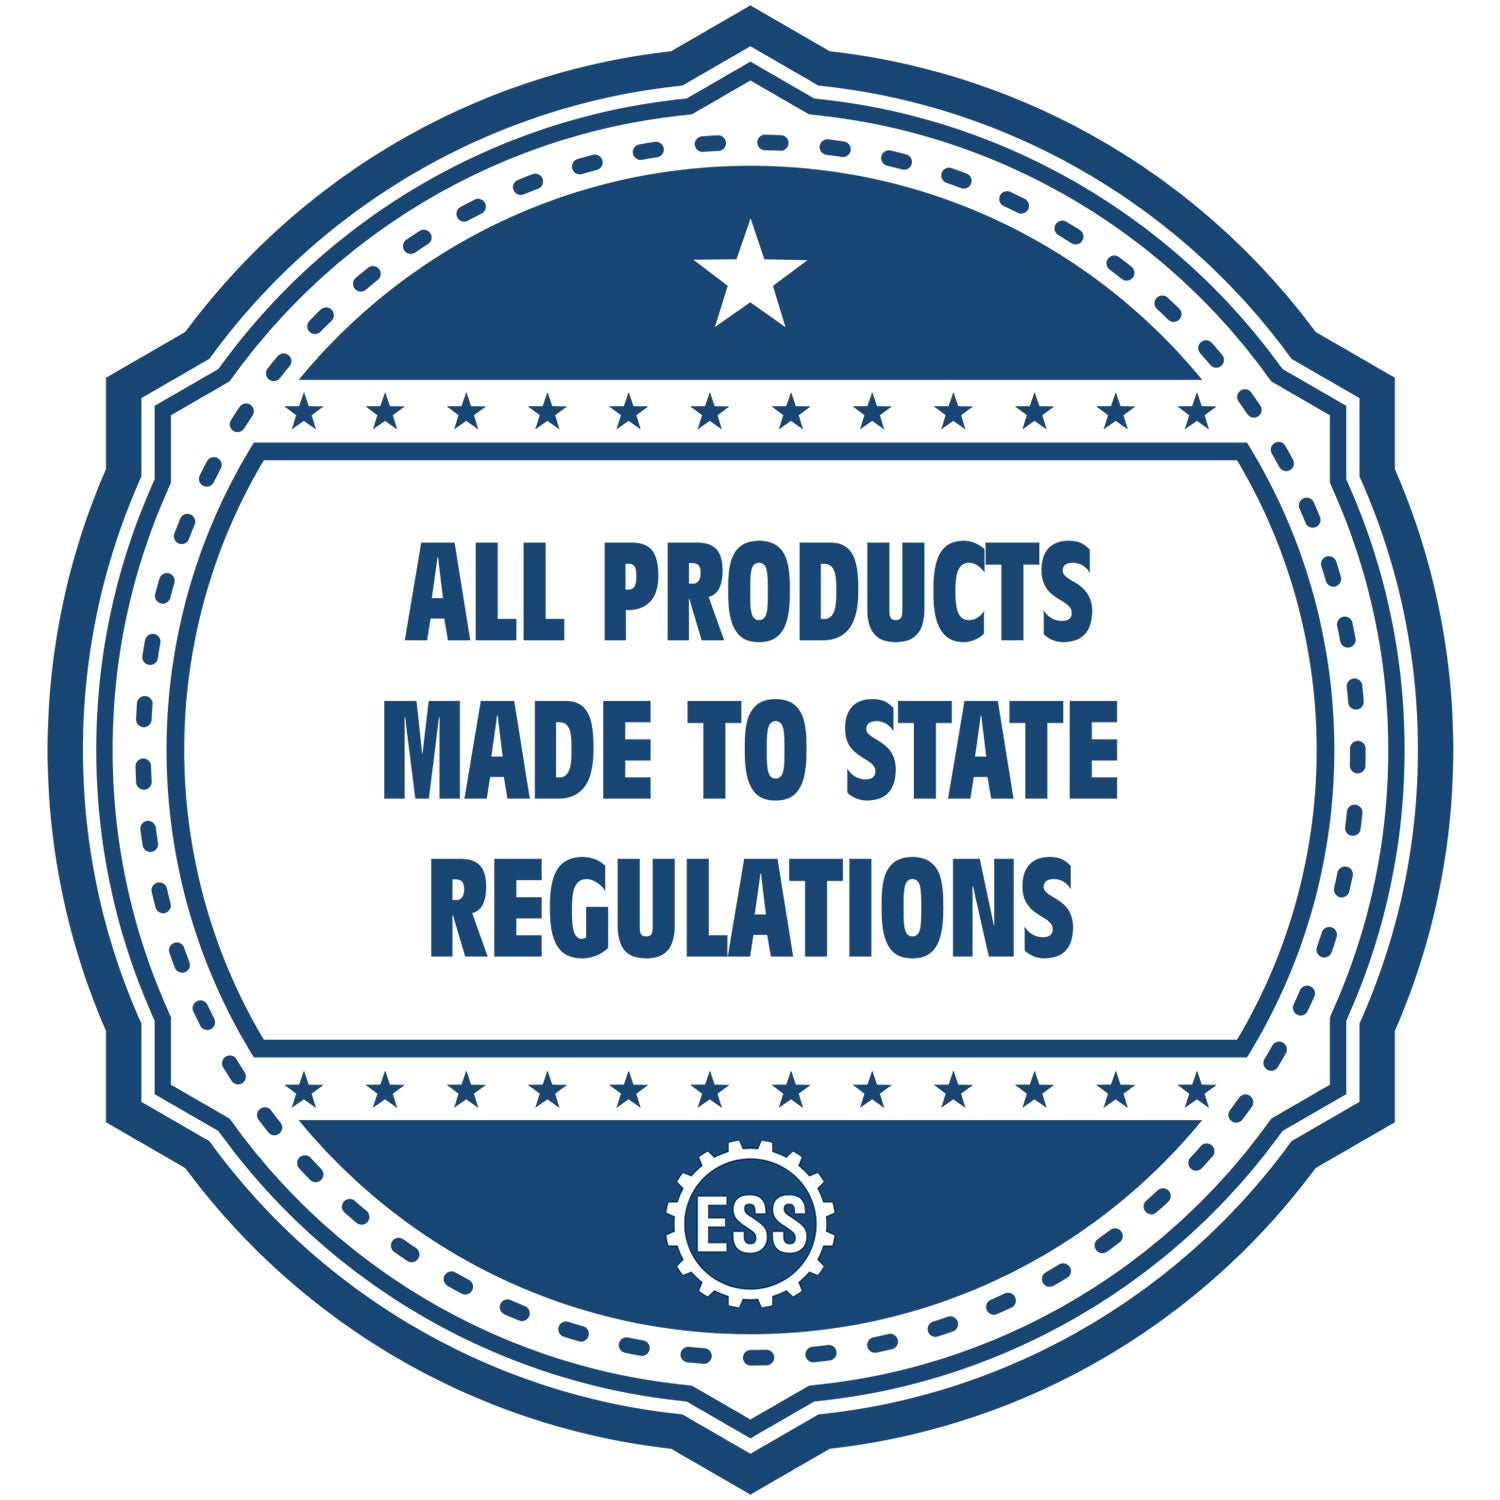 An icon or badge element for the Handheld Oregon Professional Engineer Embosser showing that this product is made in compliance with state regulations.